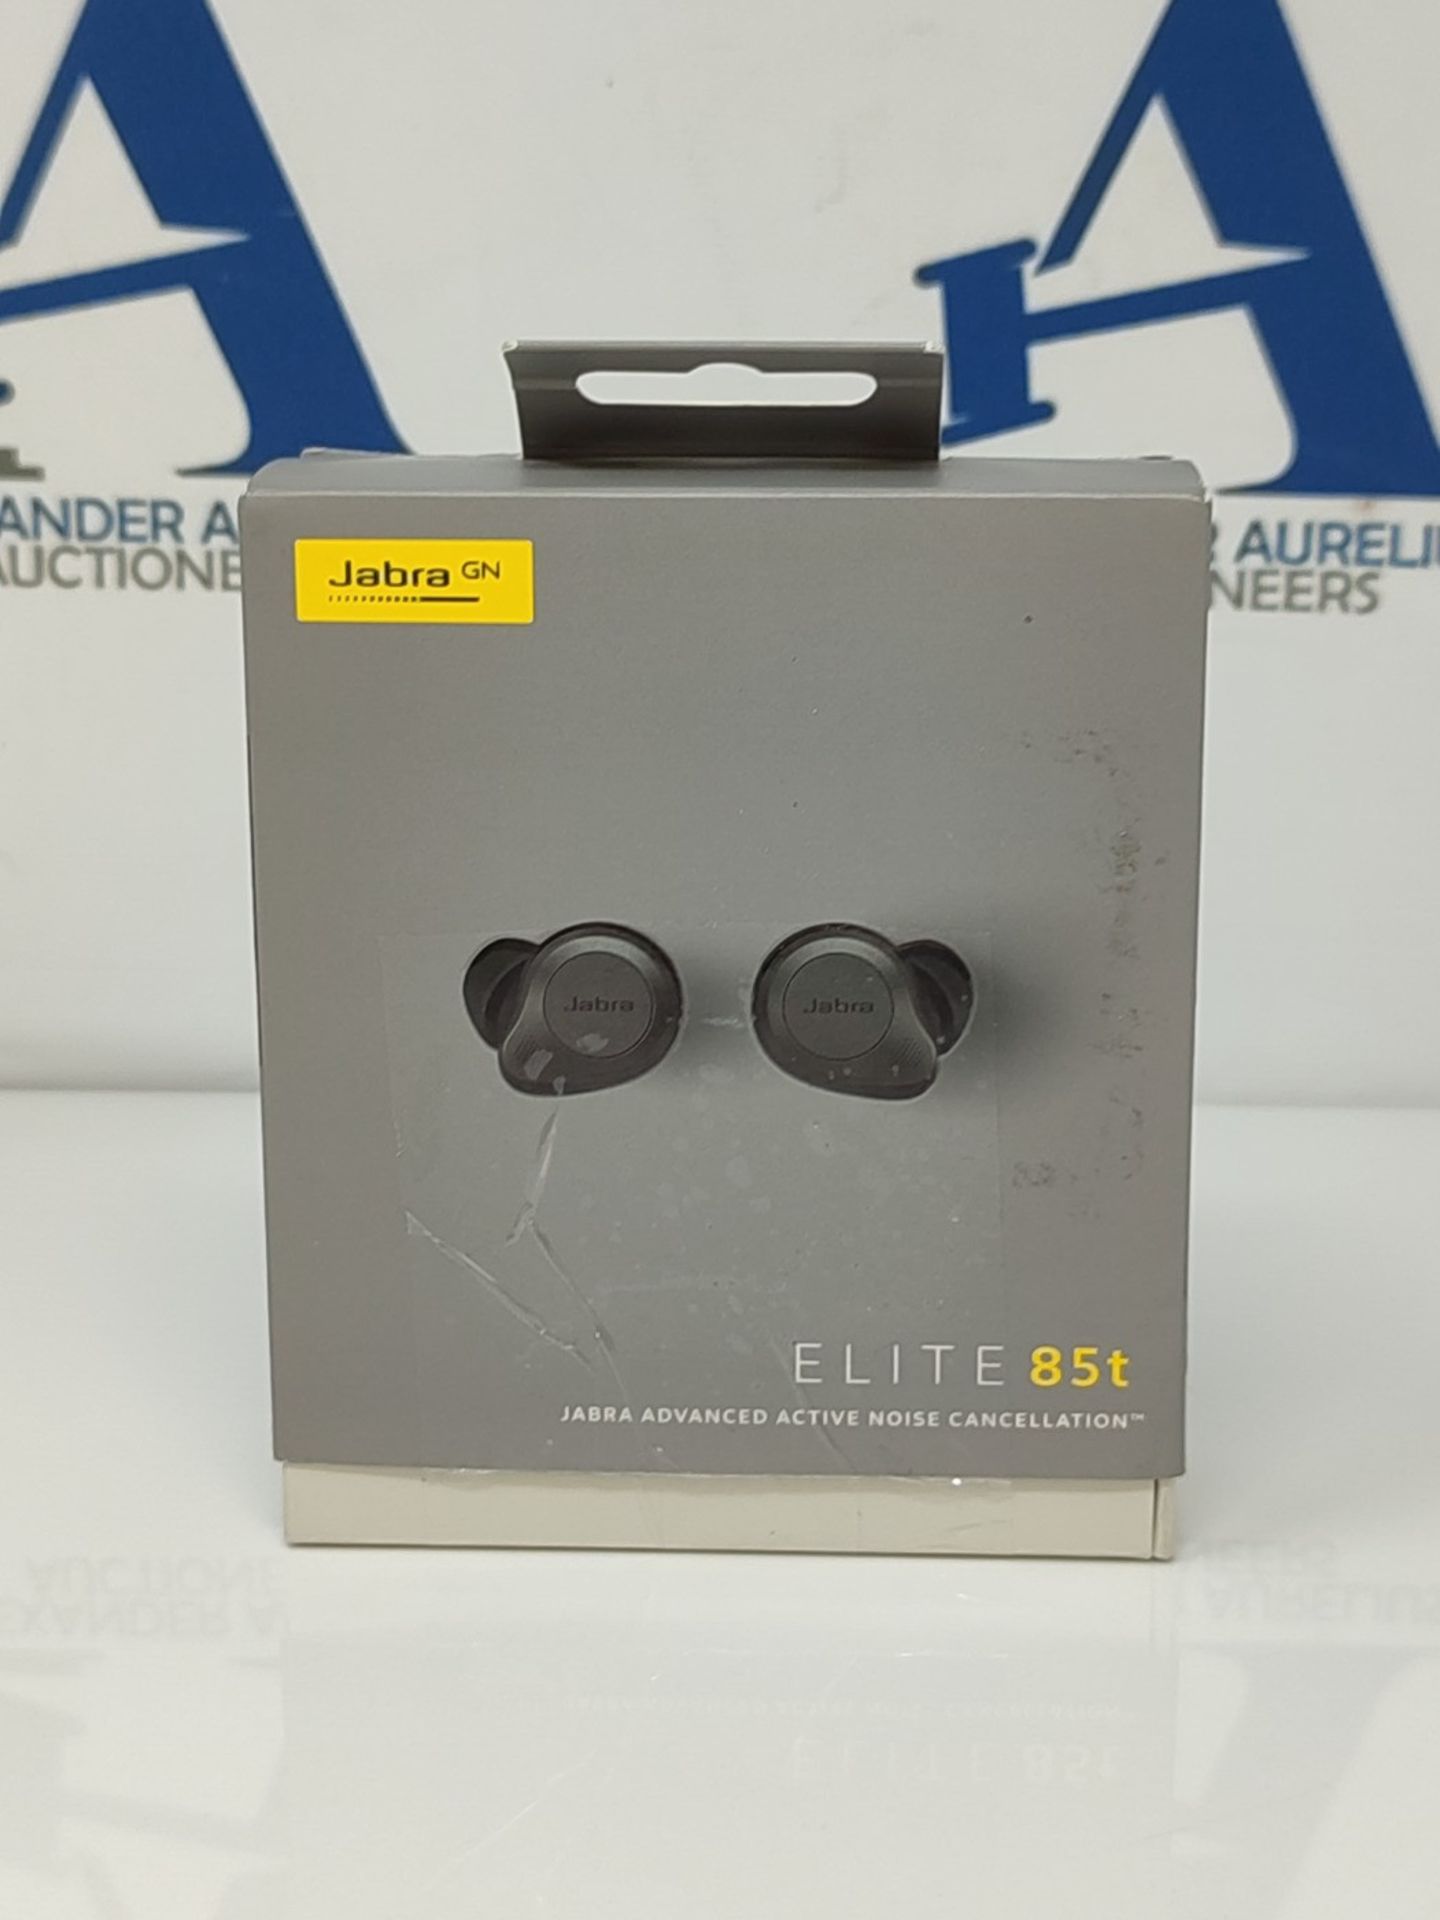 RRP £173.00 Jabra Elite 85t True Wireless Earbuds - Jabra Advanced Active Noise Cancellation with - Image 2 of 3